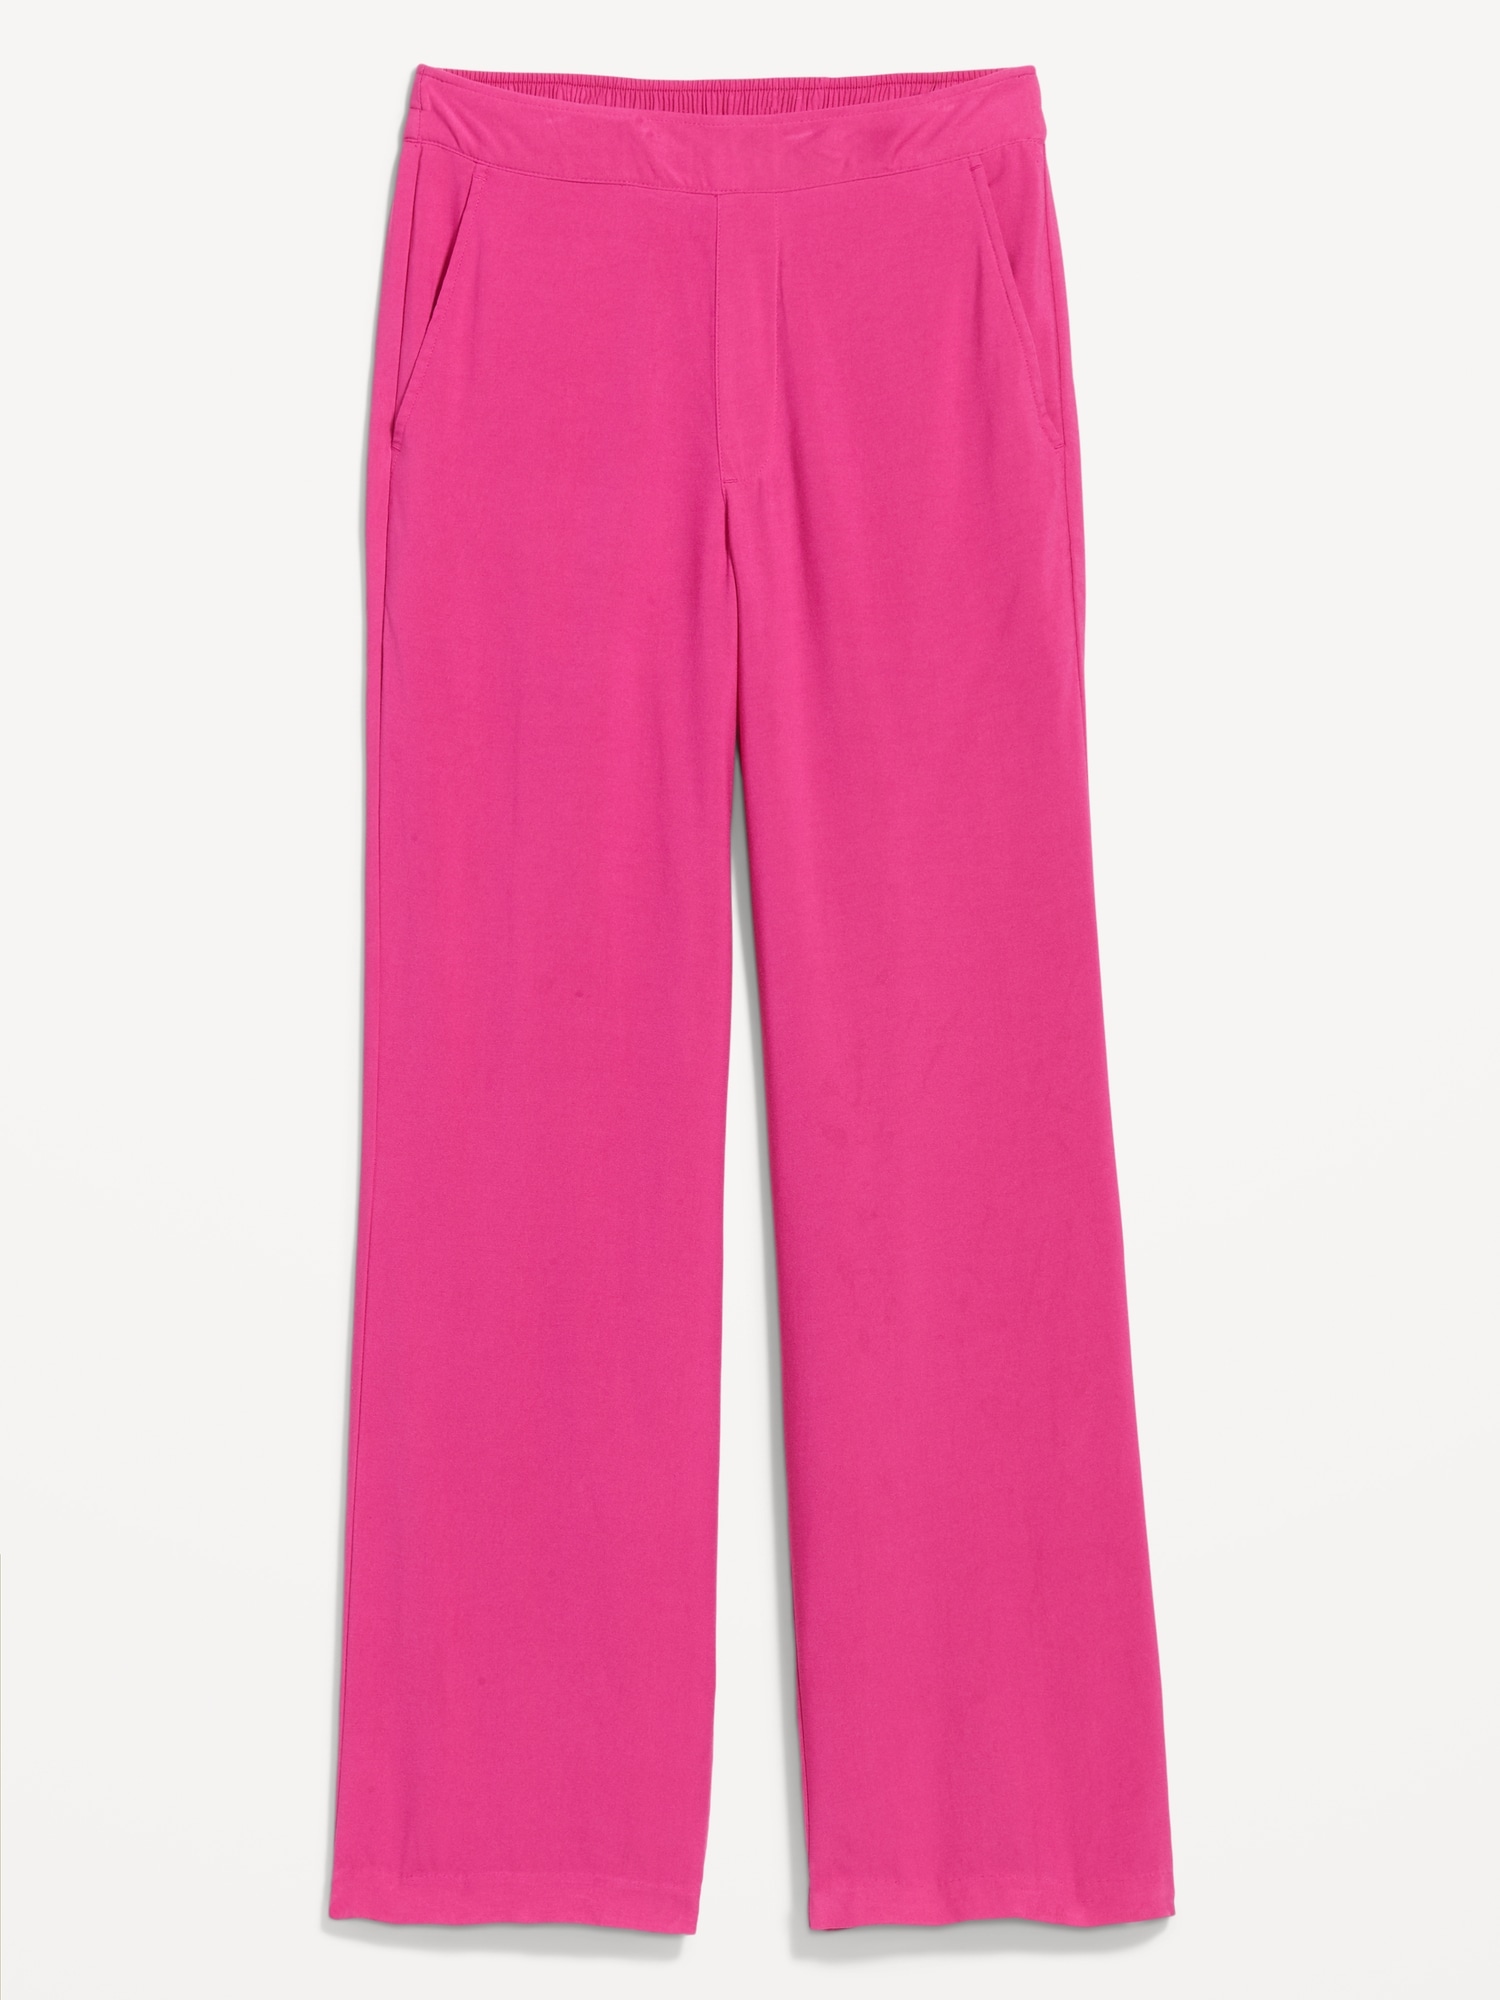 Old Navy Leggings Active High-Waisted Elevated Pink Tropical